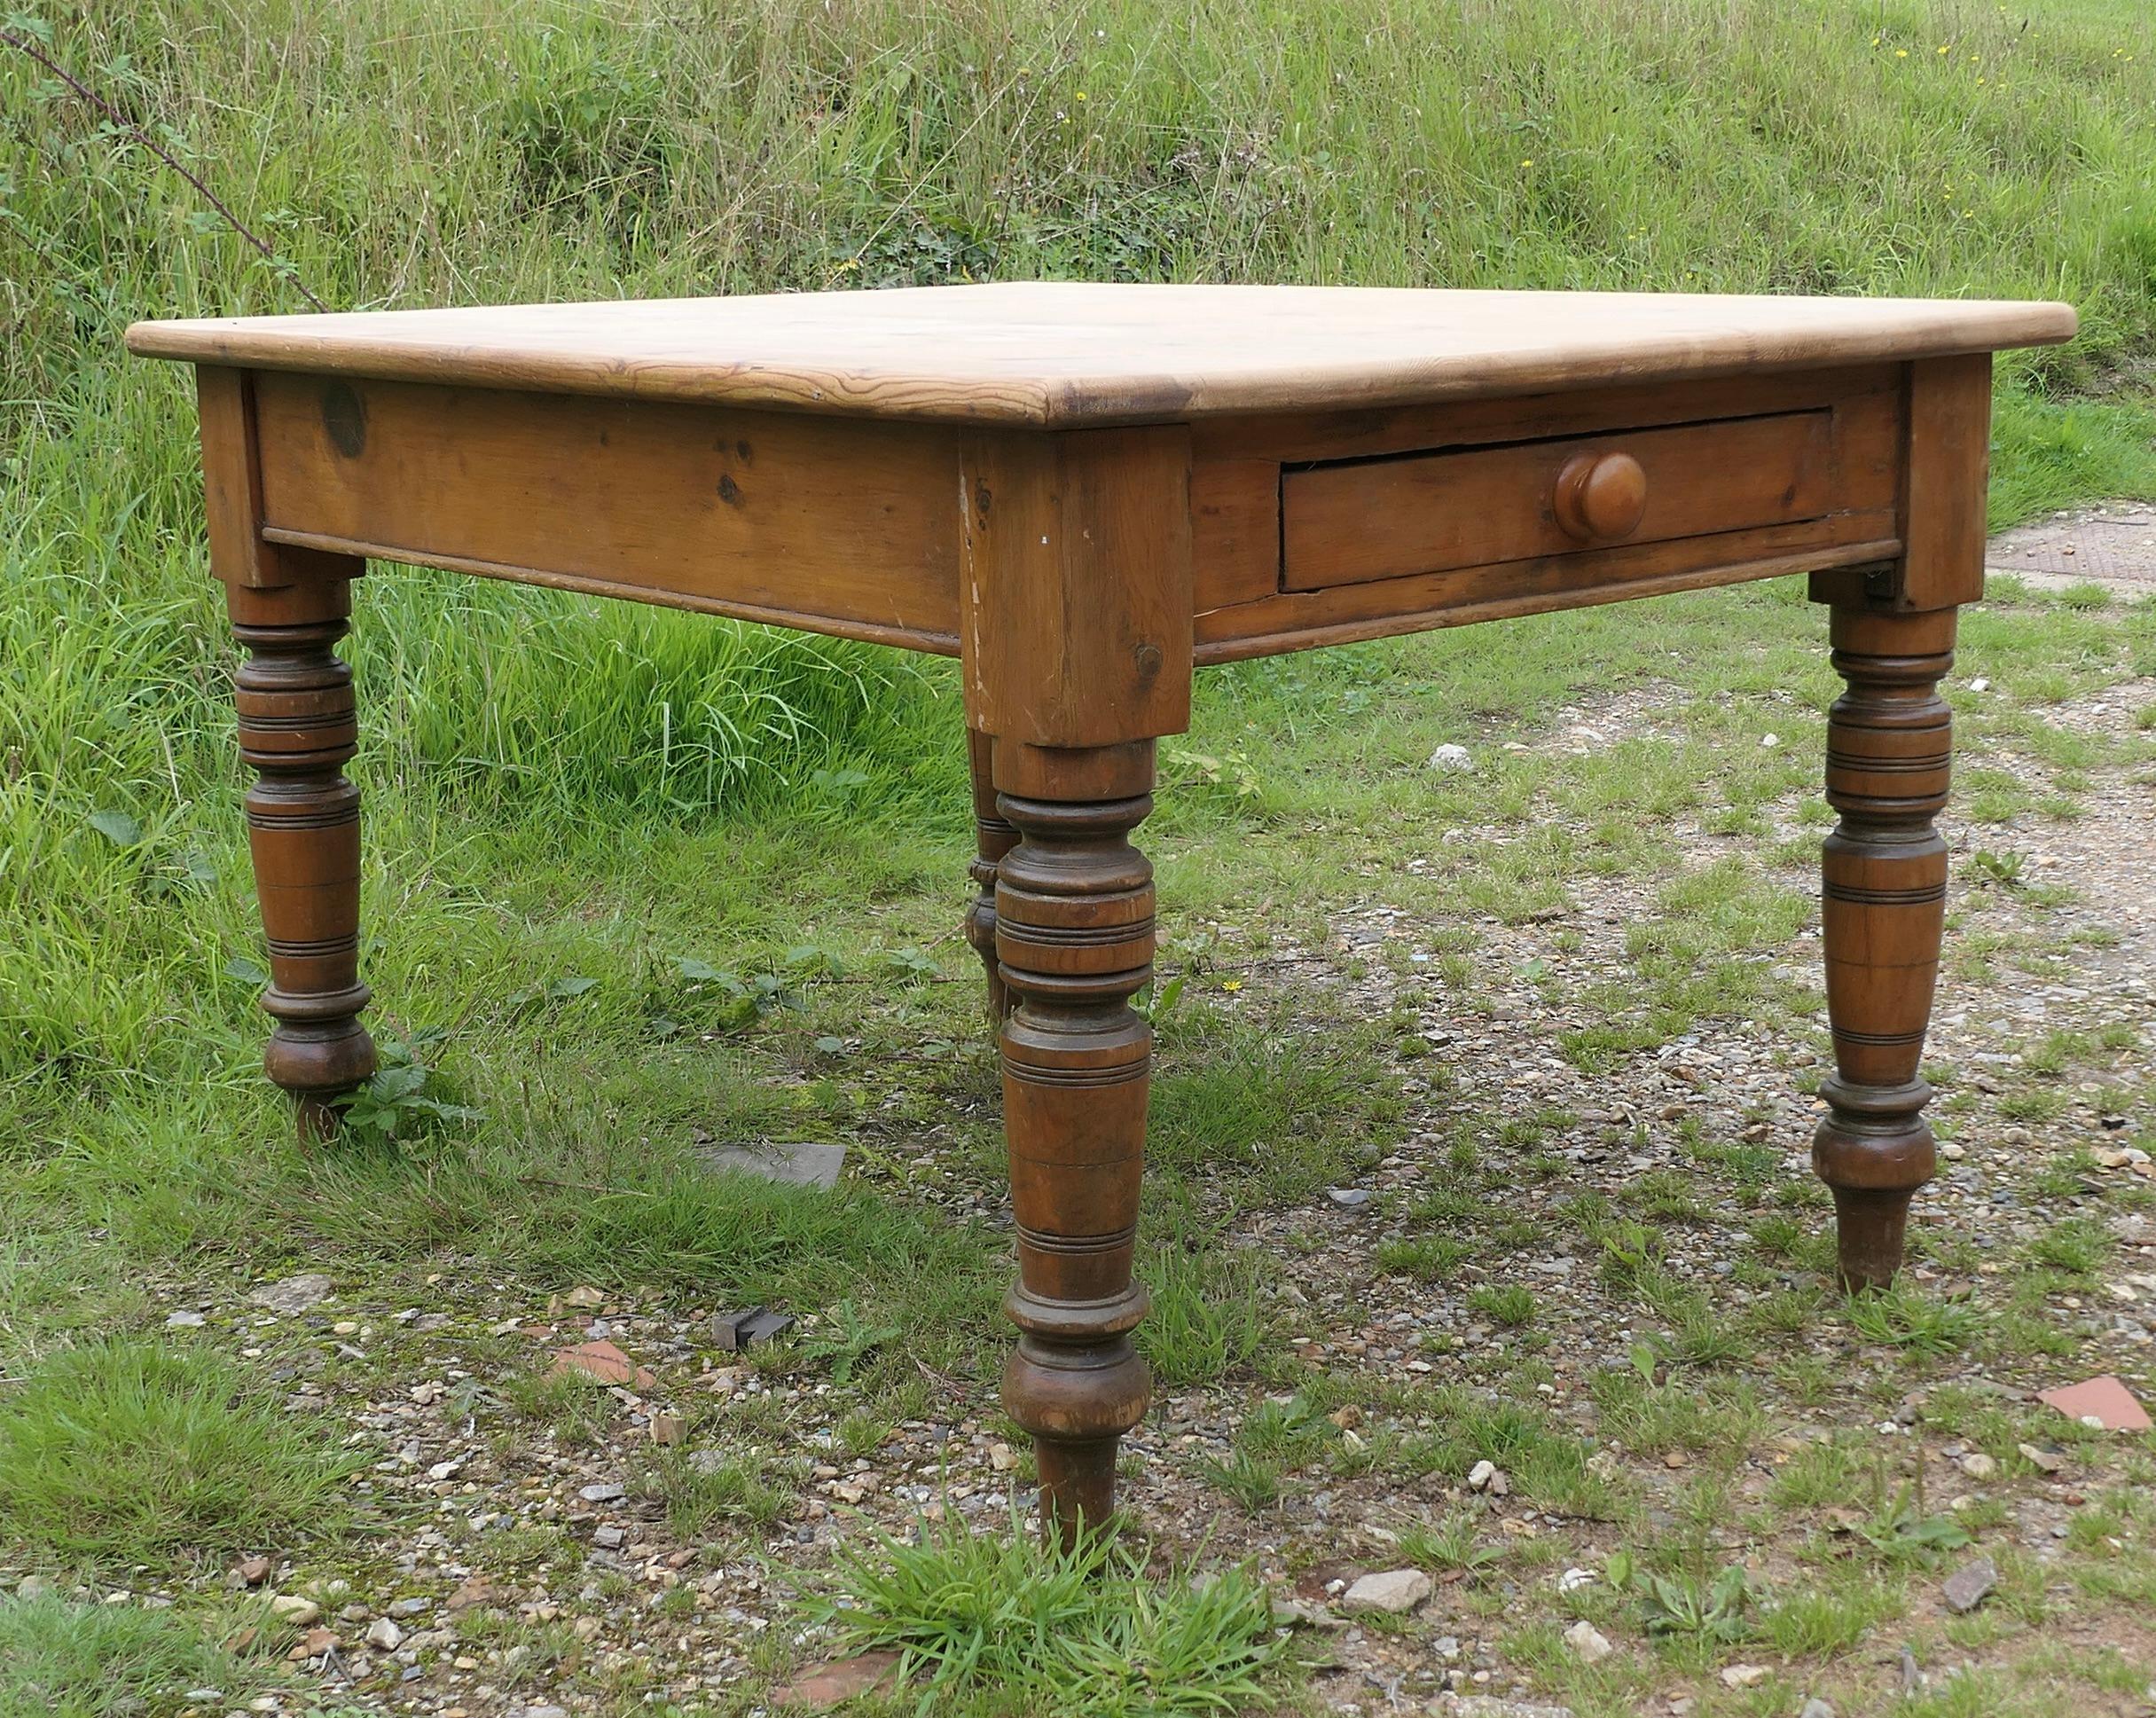 6 Seater Farmhouse Pine Table  

This is a good Rustic Farmhouse table, it has an old scrub top and the chunky legs are turned, the table has an added advantage of having a drawer at each end 
The table though old is very sturdy,  it has a few signs